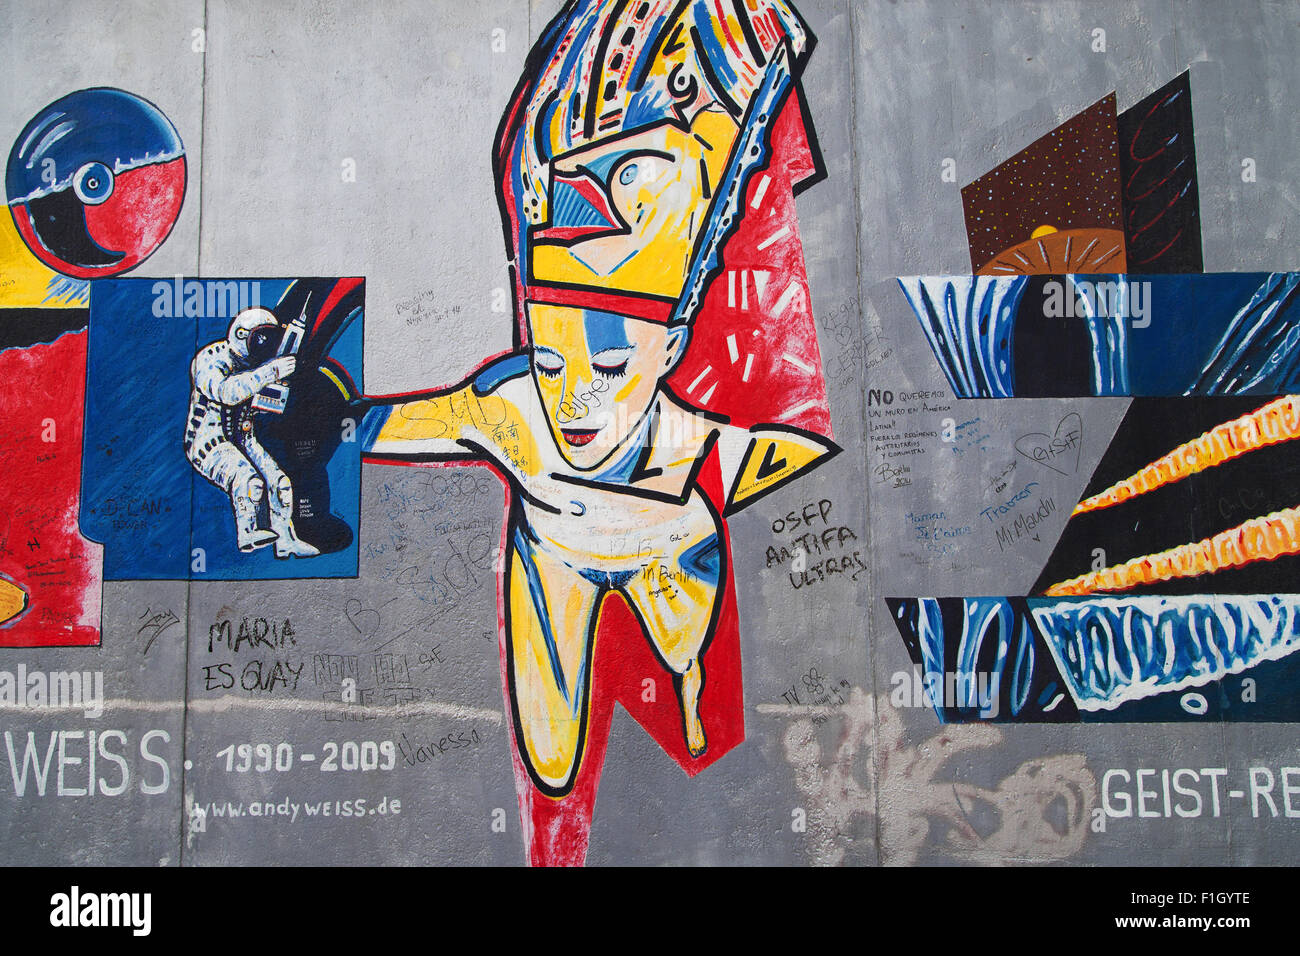 Mural 'Geist Reise' by Andy Weiss on the East Side Gallery, Berlin, Germany. Stock Photo